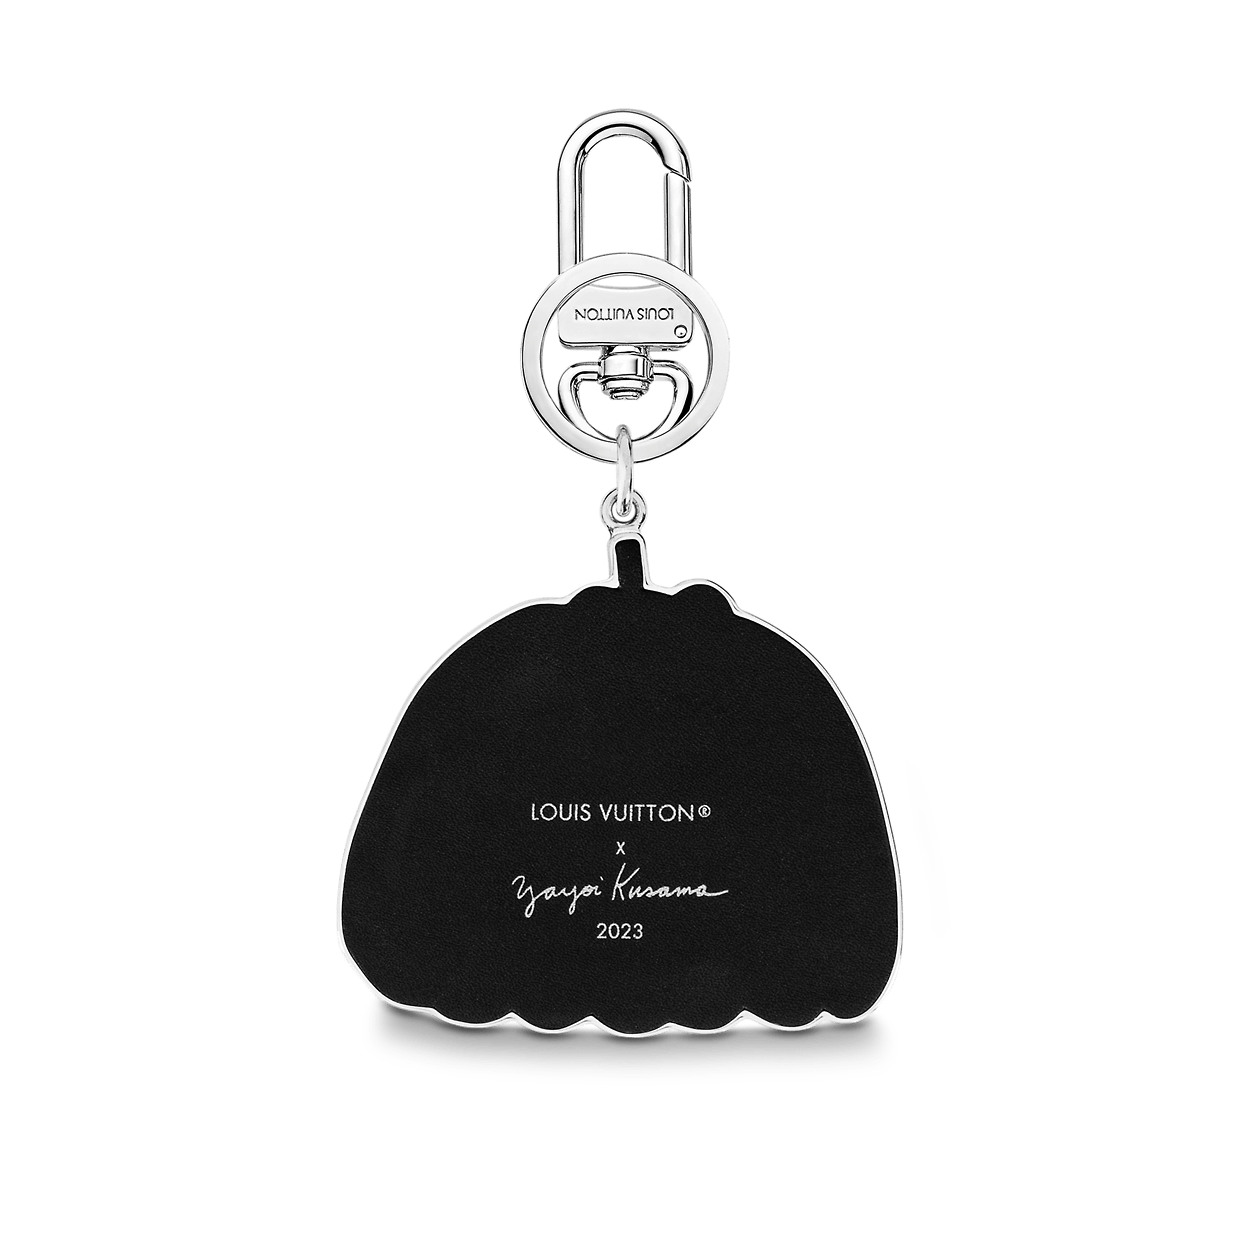 LV Fortune Cookie Bag Charm & Key Holder S00 - Accessories